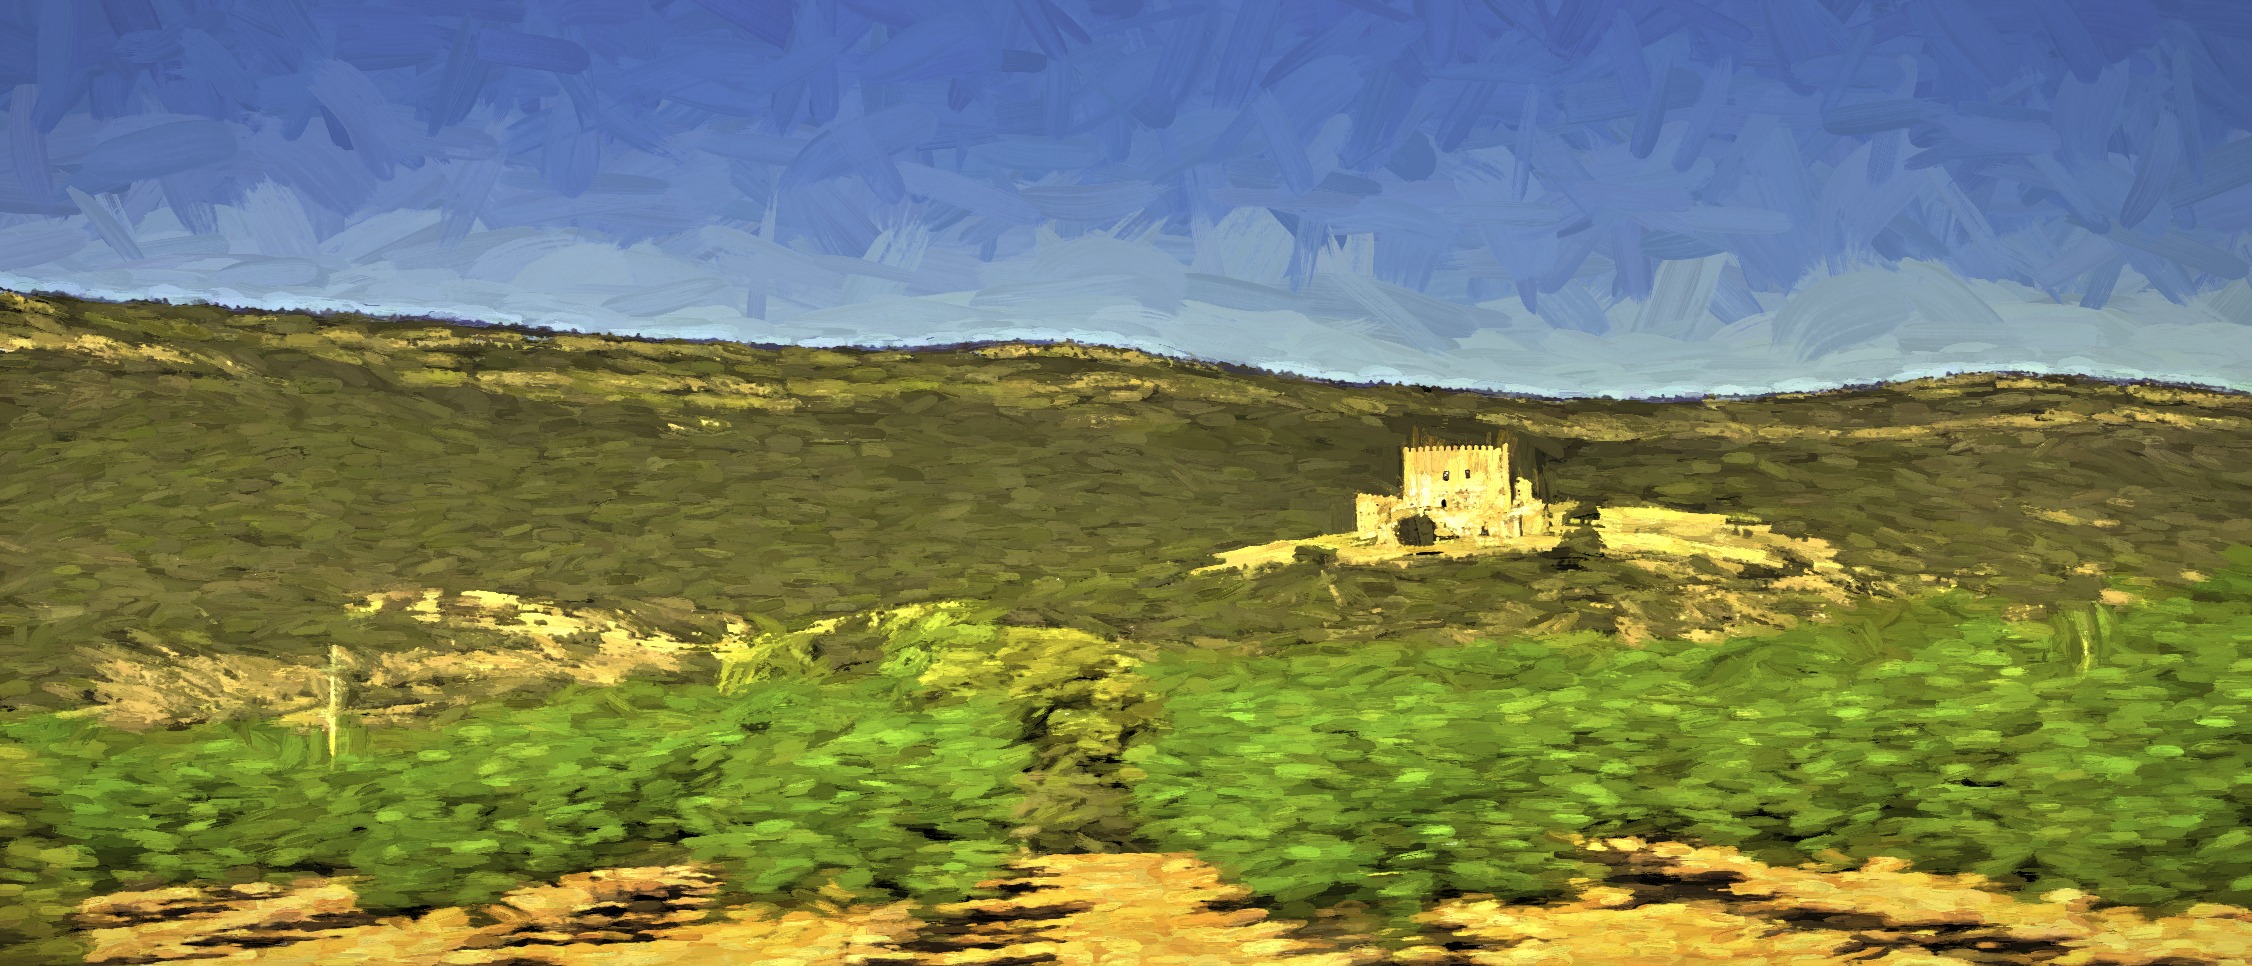 The Spanish countryside with an old structure on a rise.